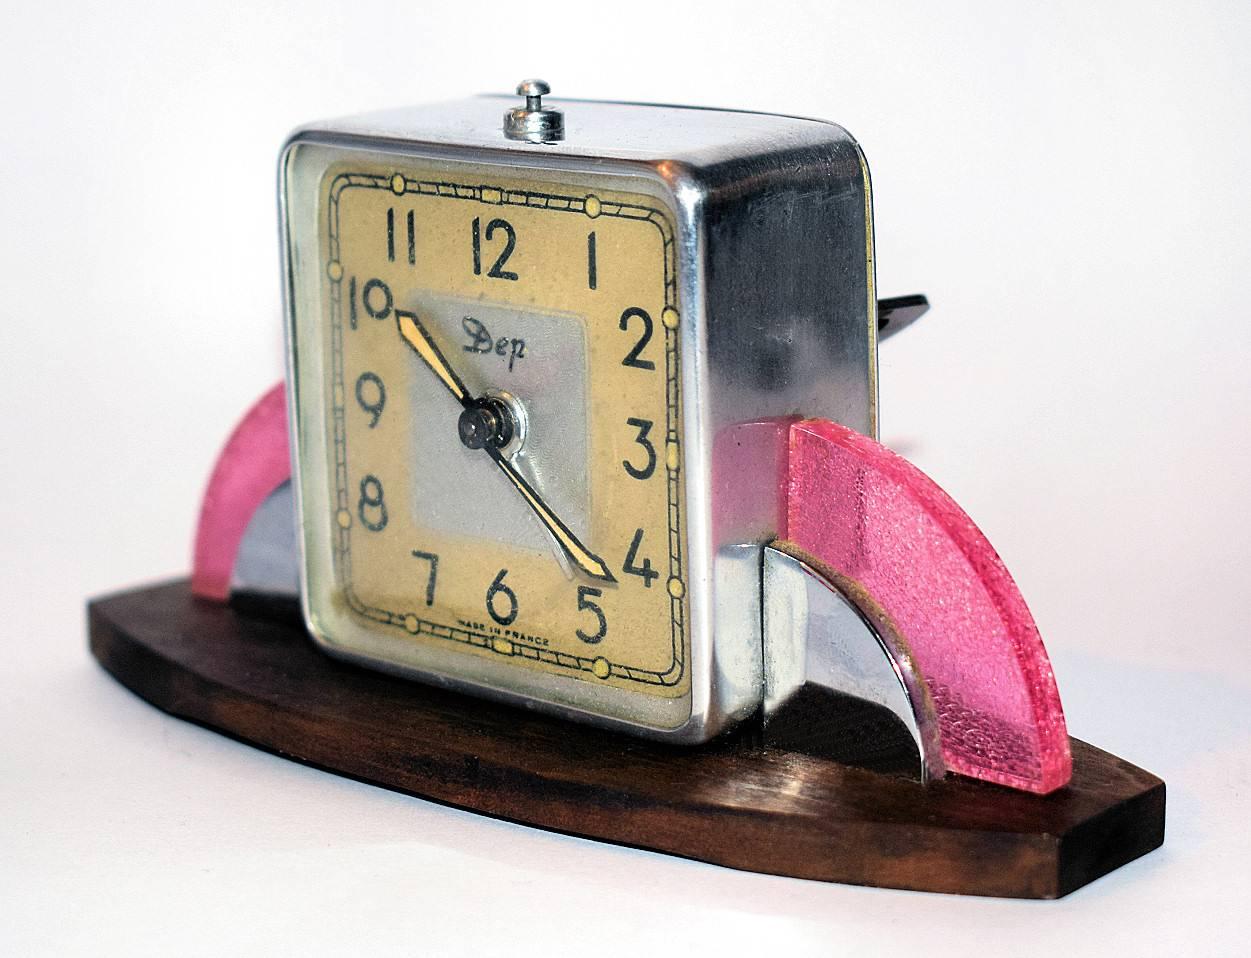 Attractive 1930s Art Deco Modernist clock by the French makers Dep. Features a wooden base with a rainbow of pink celluloid and chrome either side the main dial. We've had this lovely clock fully serviced and so comes to you in full working order.